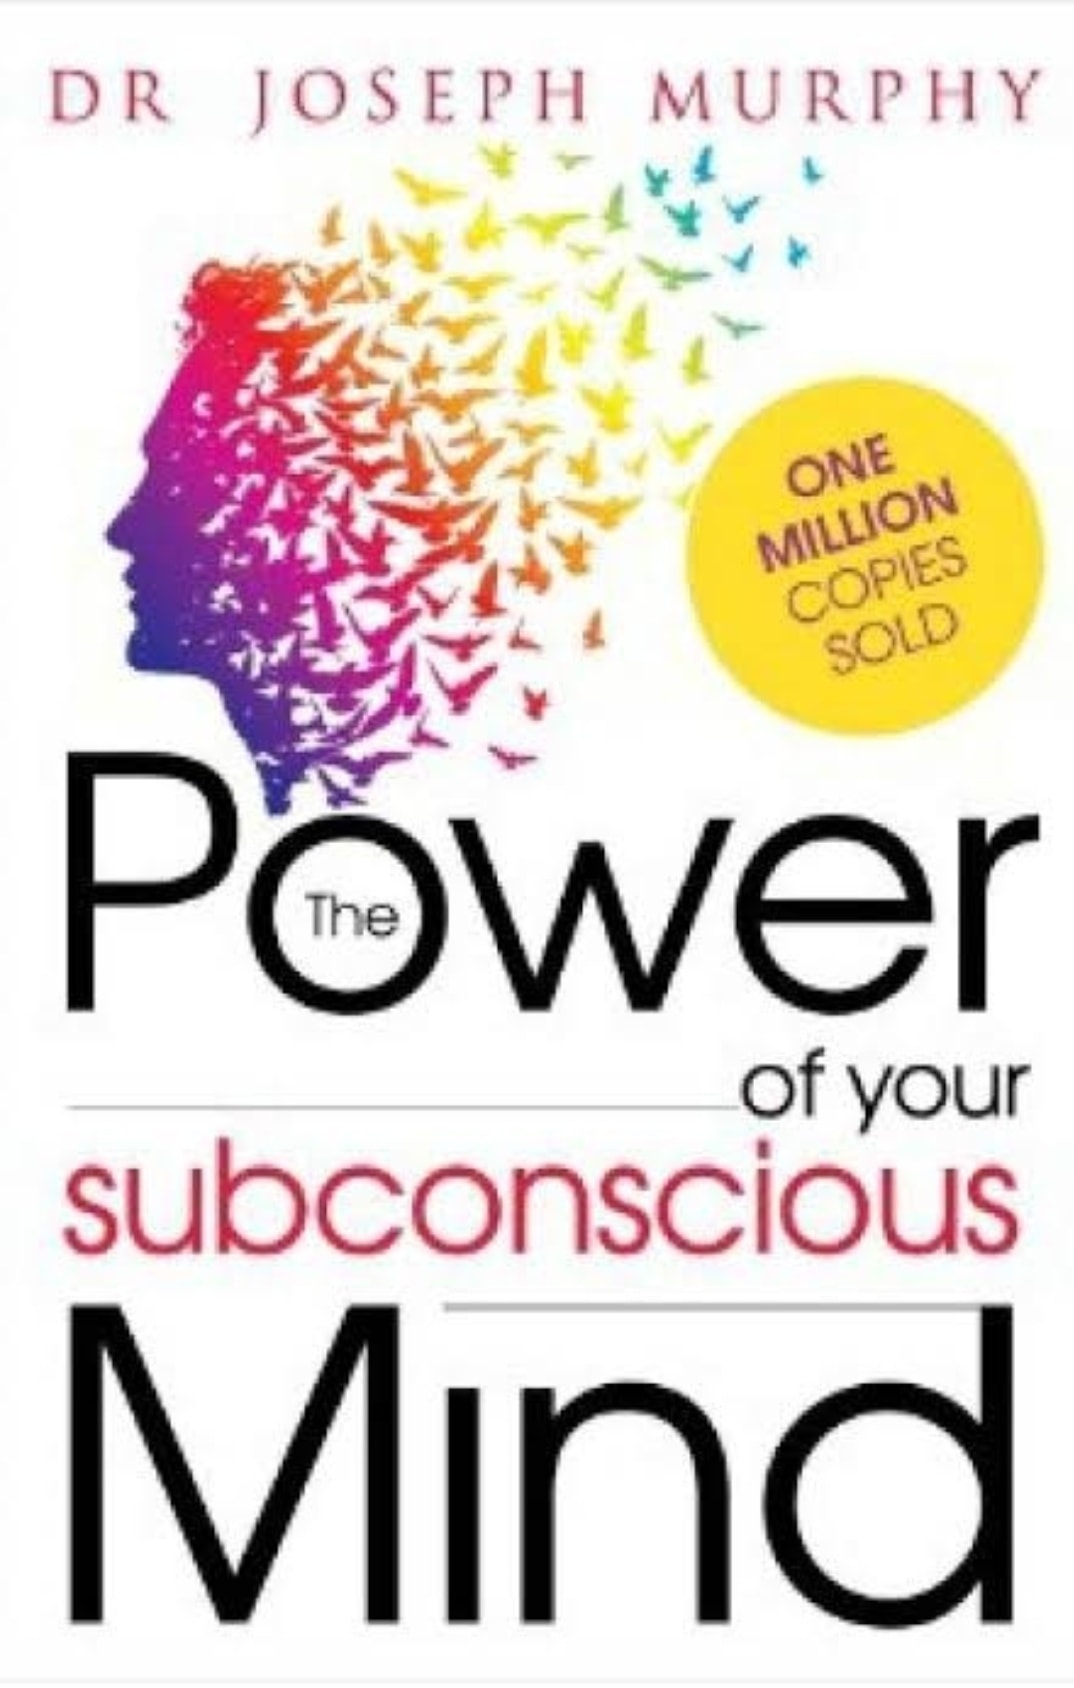 Power of subconscious mind